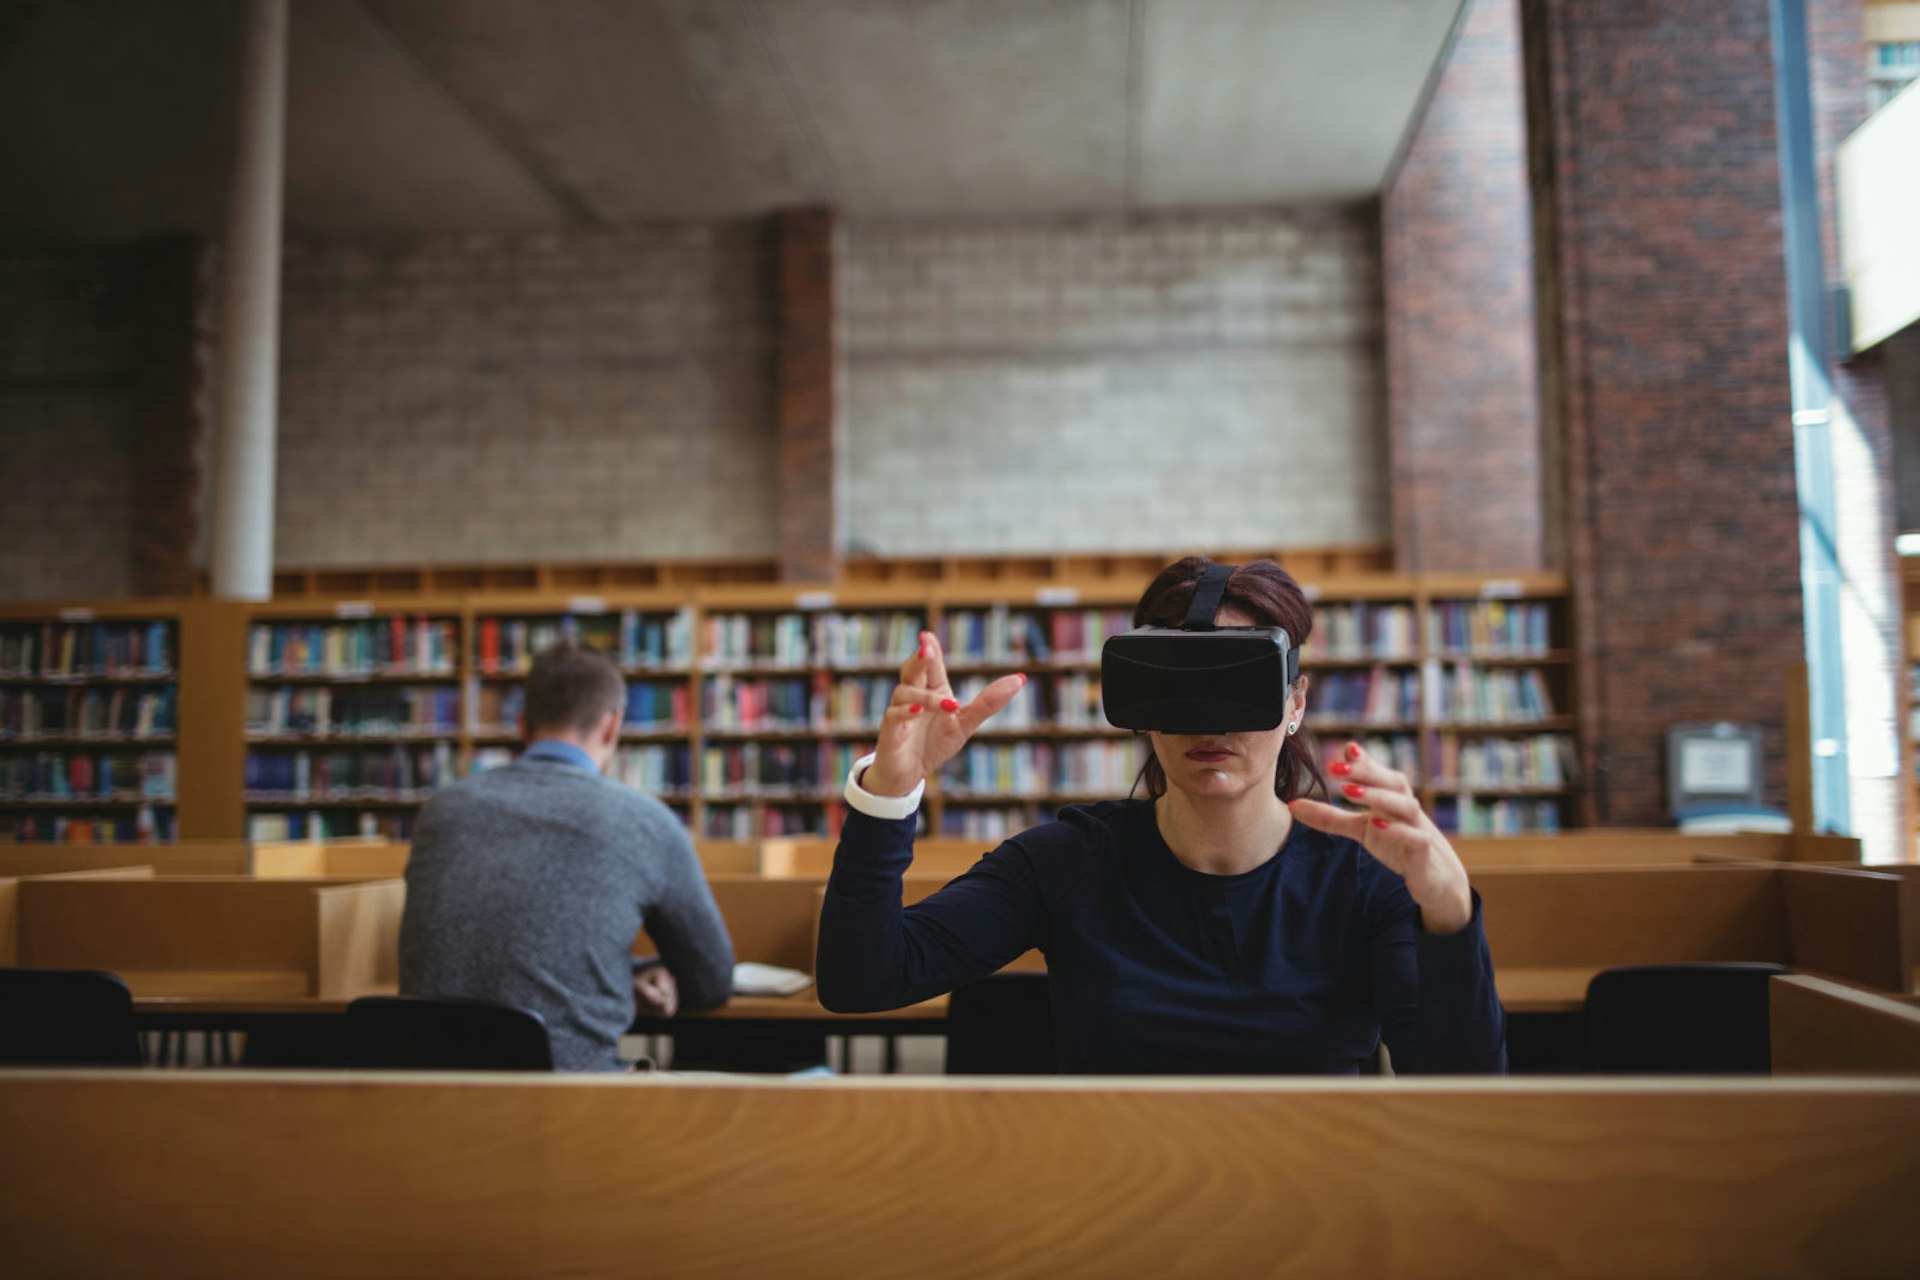 Travel predictions for 2018 - a woman in a library wearing a virtual reality headset © wavebreakmedia / Shutterstock